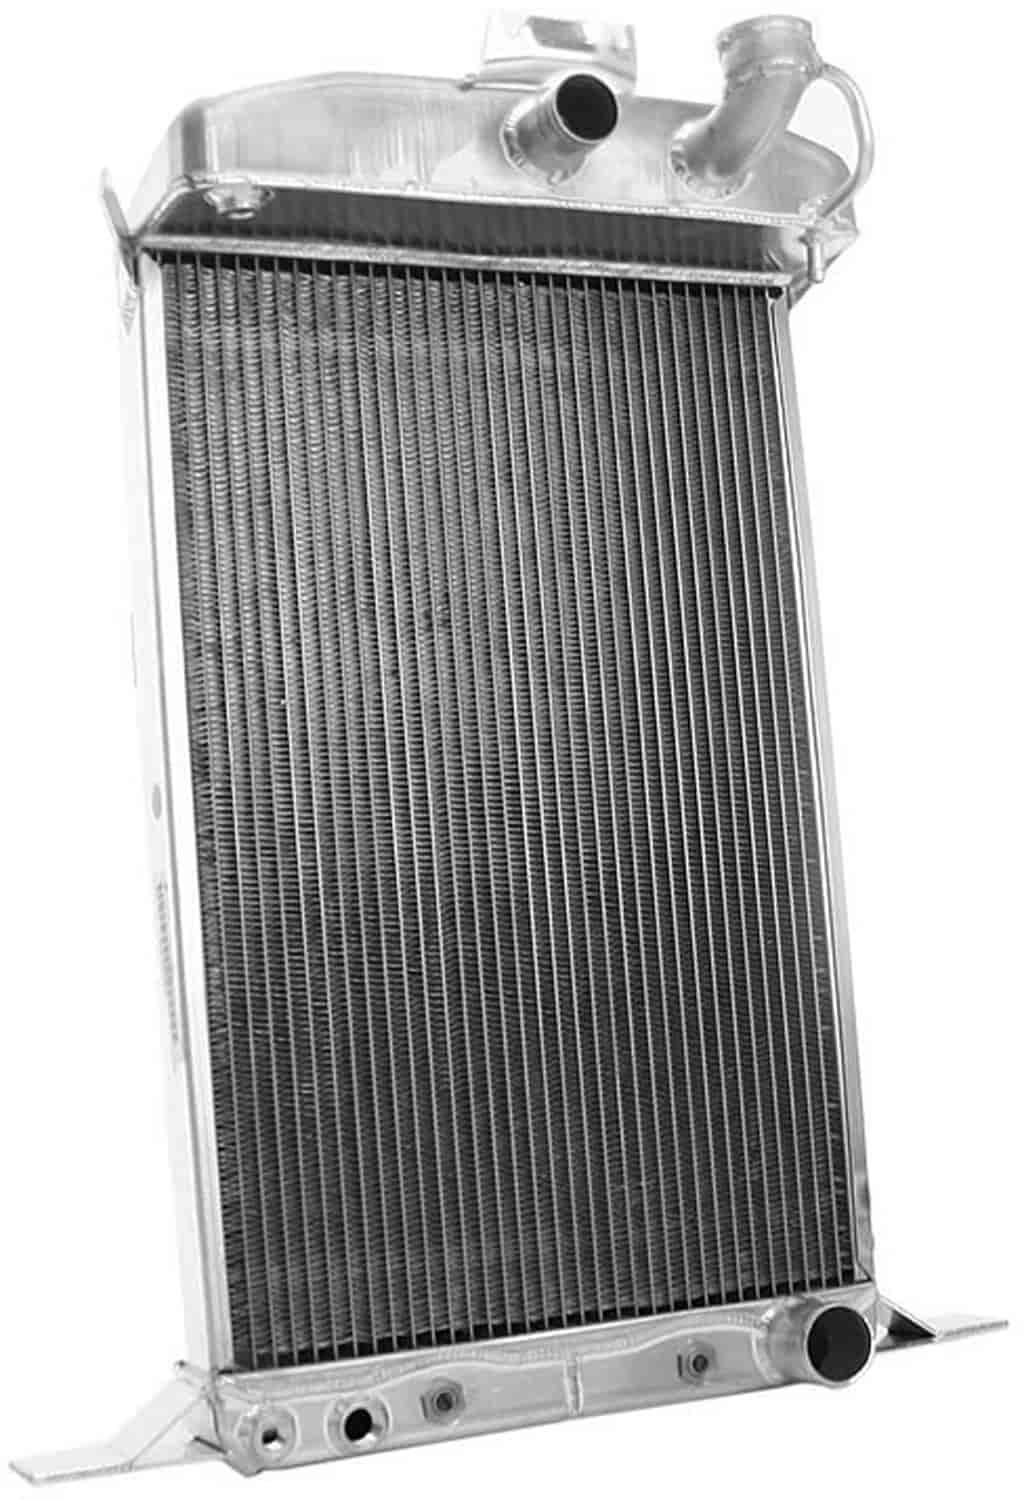 ExactFit Radiator for 1937-1938 Ford with Early GM